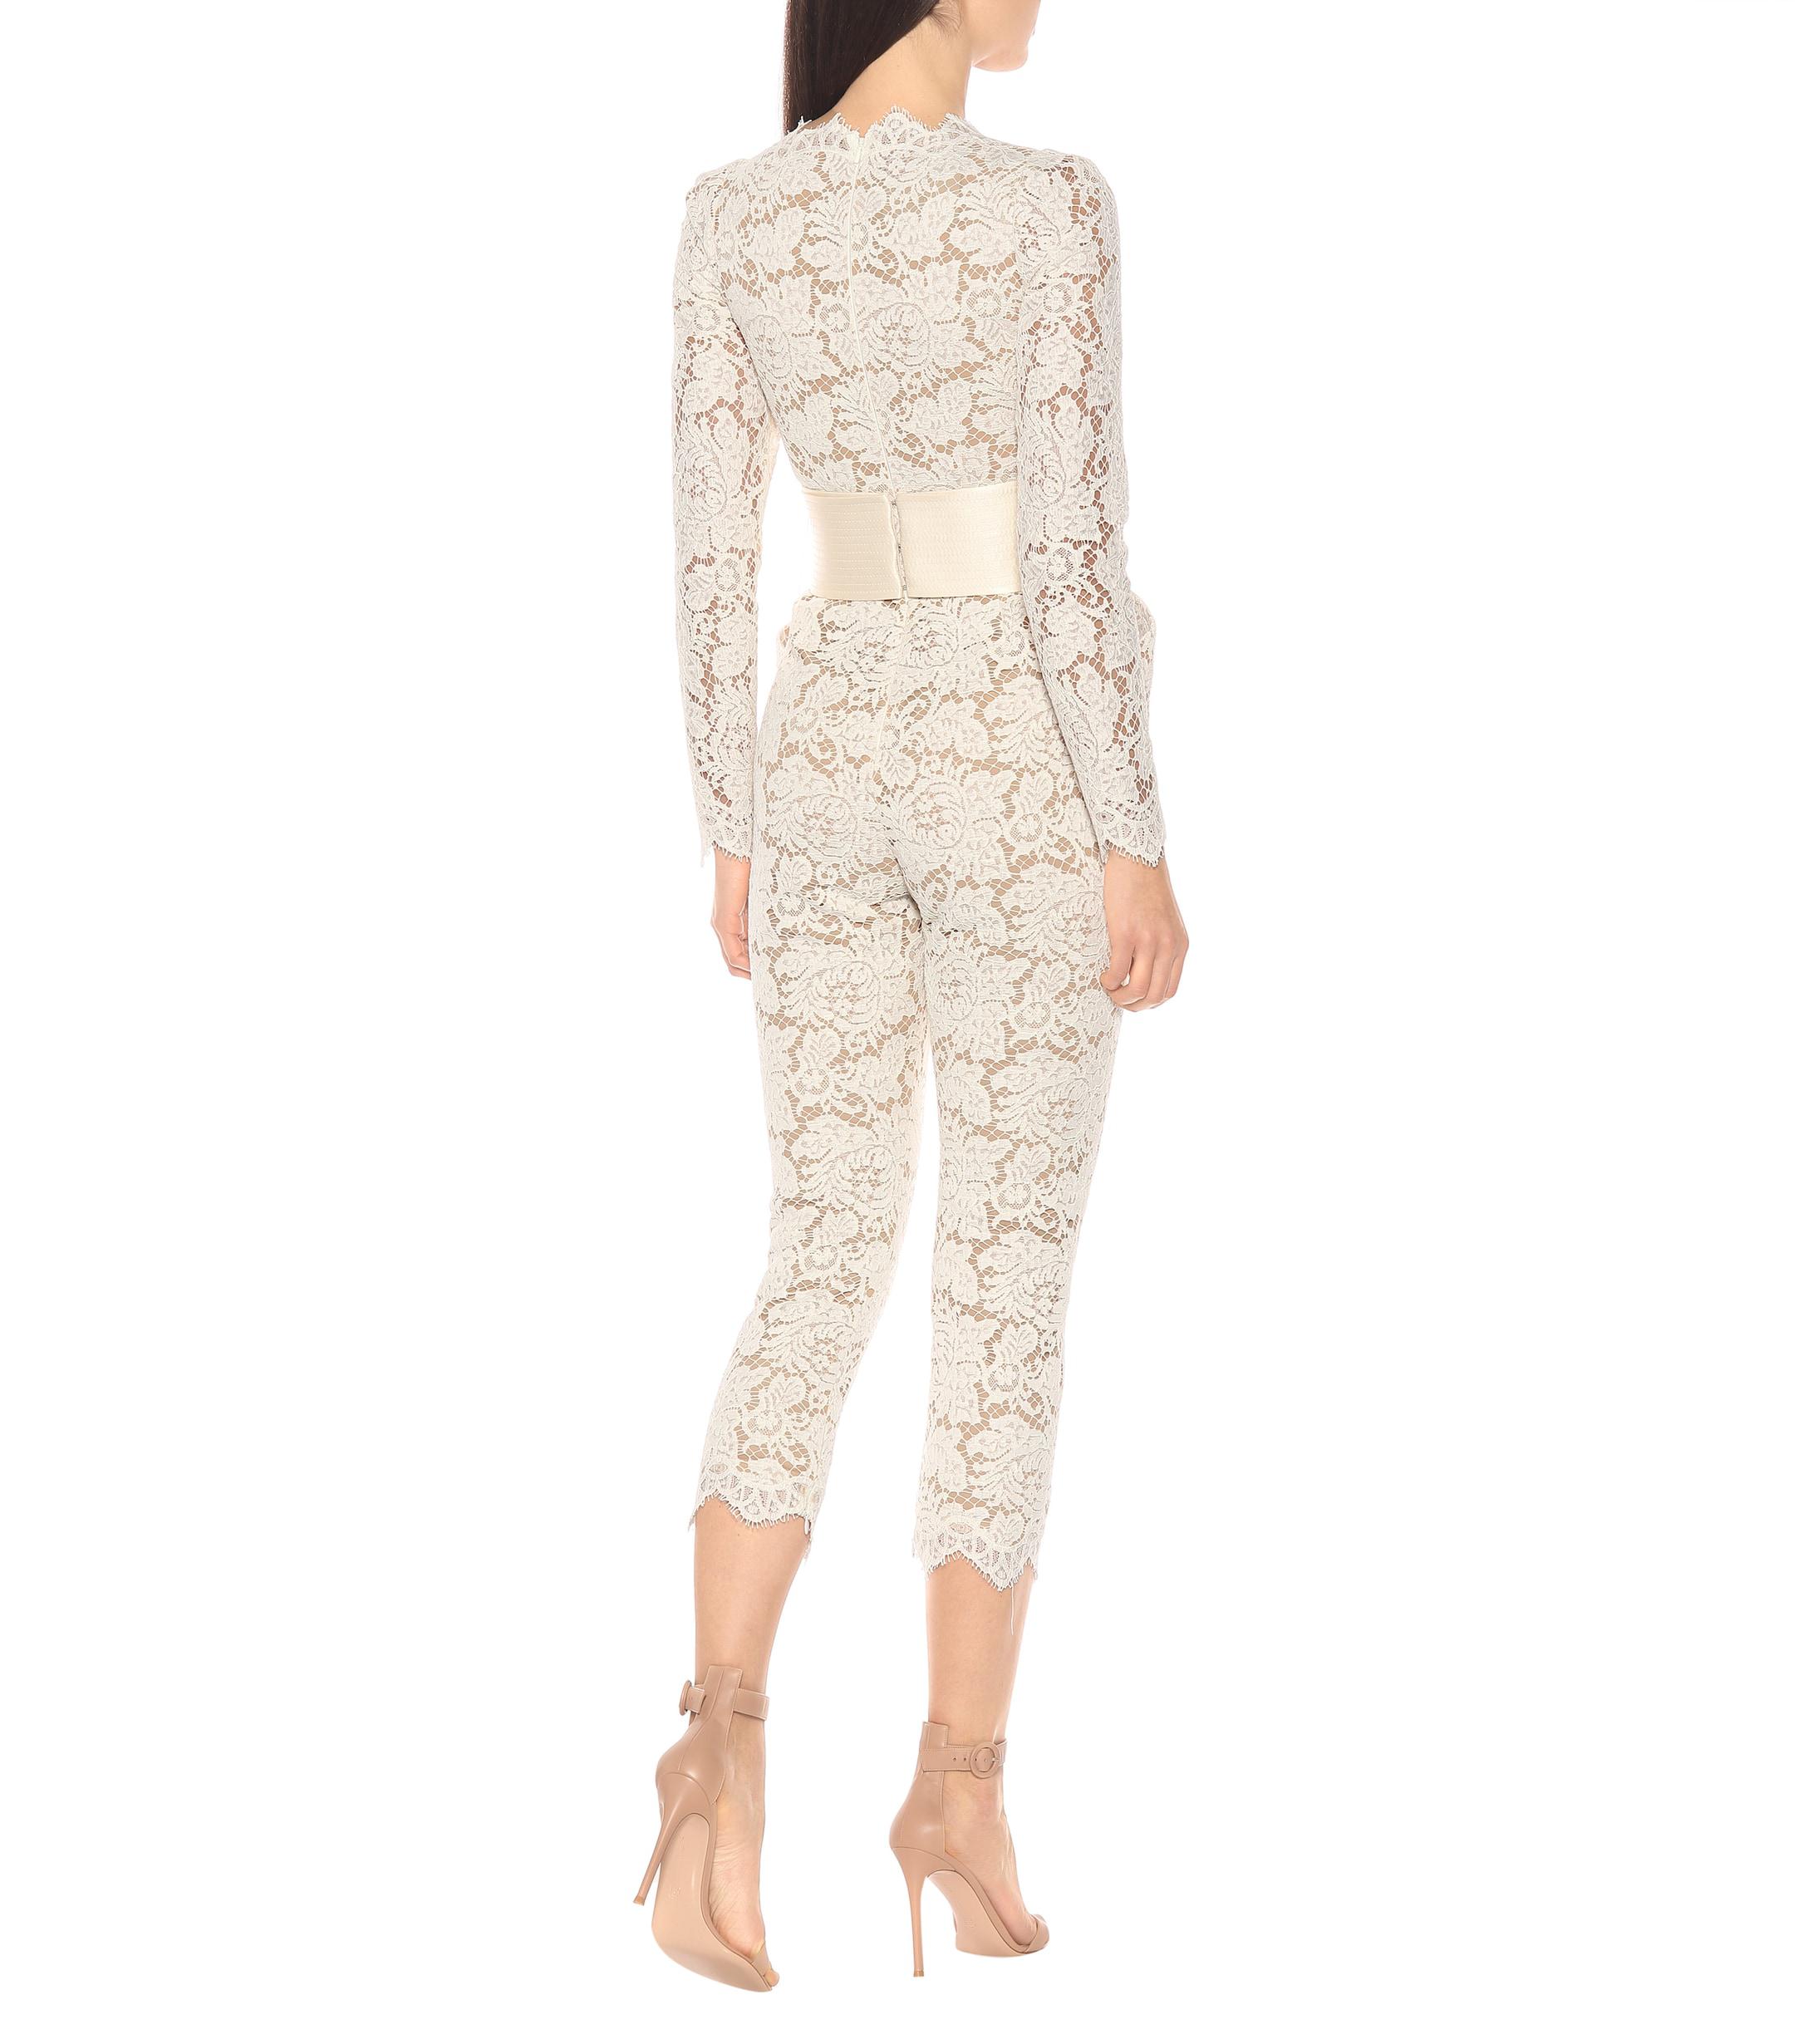 Stella McCartney Pearl Lace Jumpsuit in Ivory (White) - Lyst